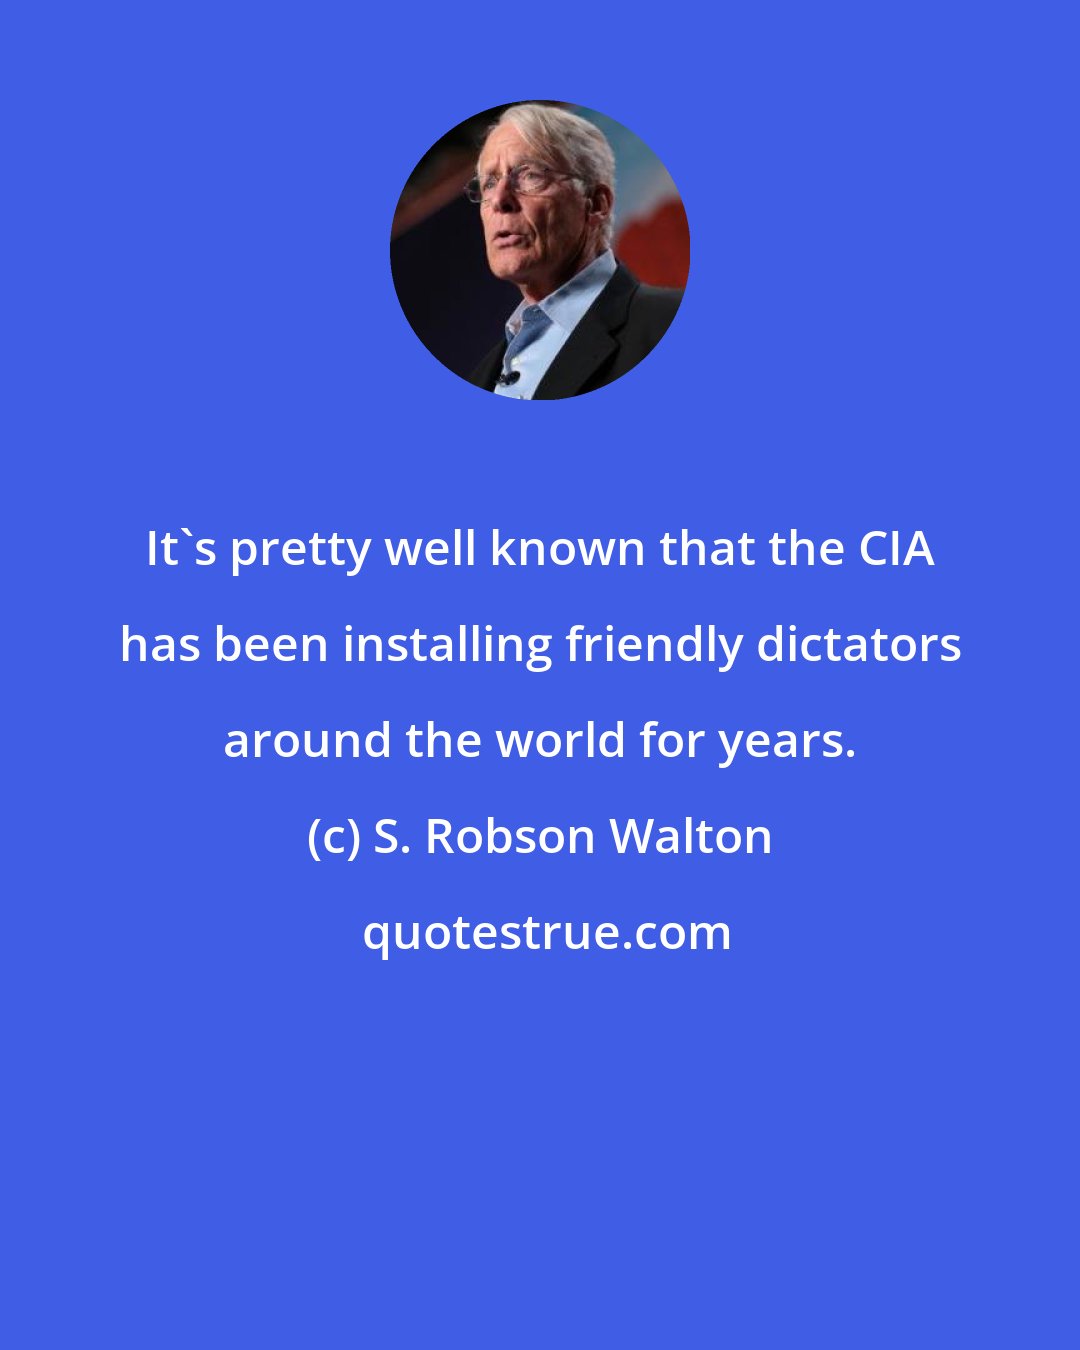 S. Robson Walton: It's pretty well known that the CIA has been installing friendly dictators around the world for years.